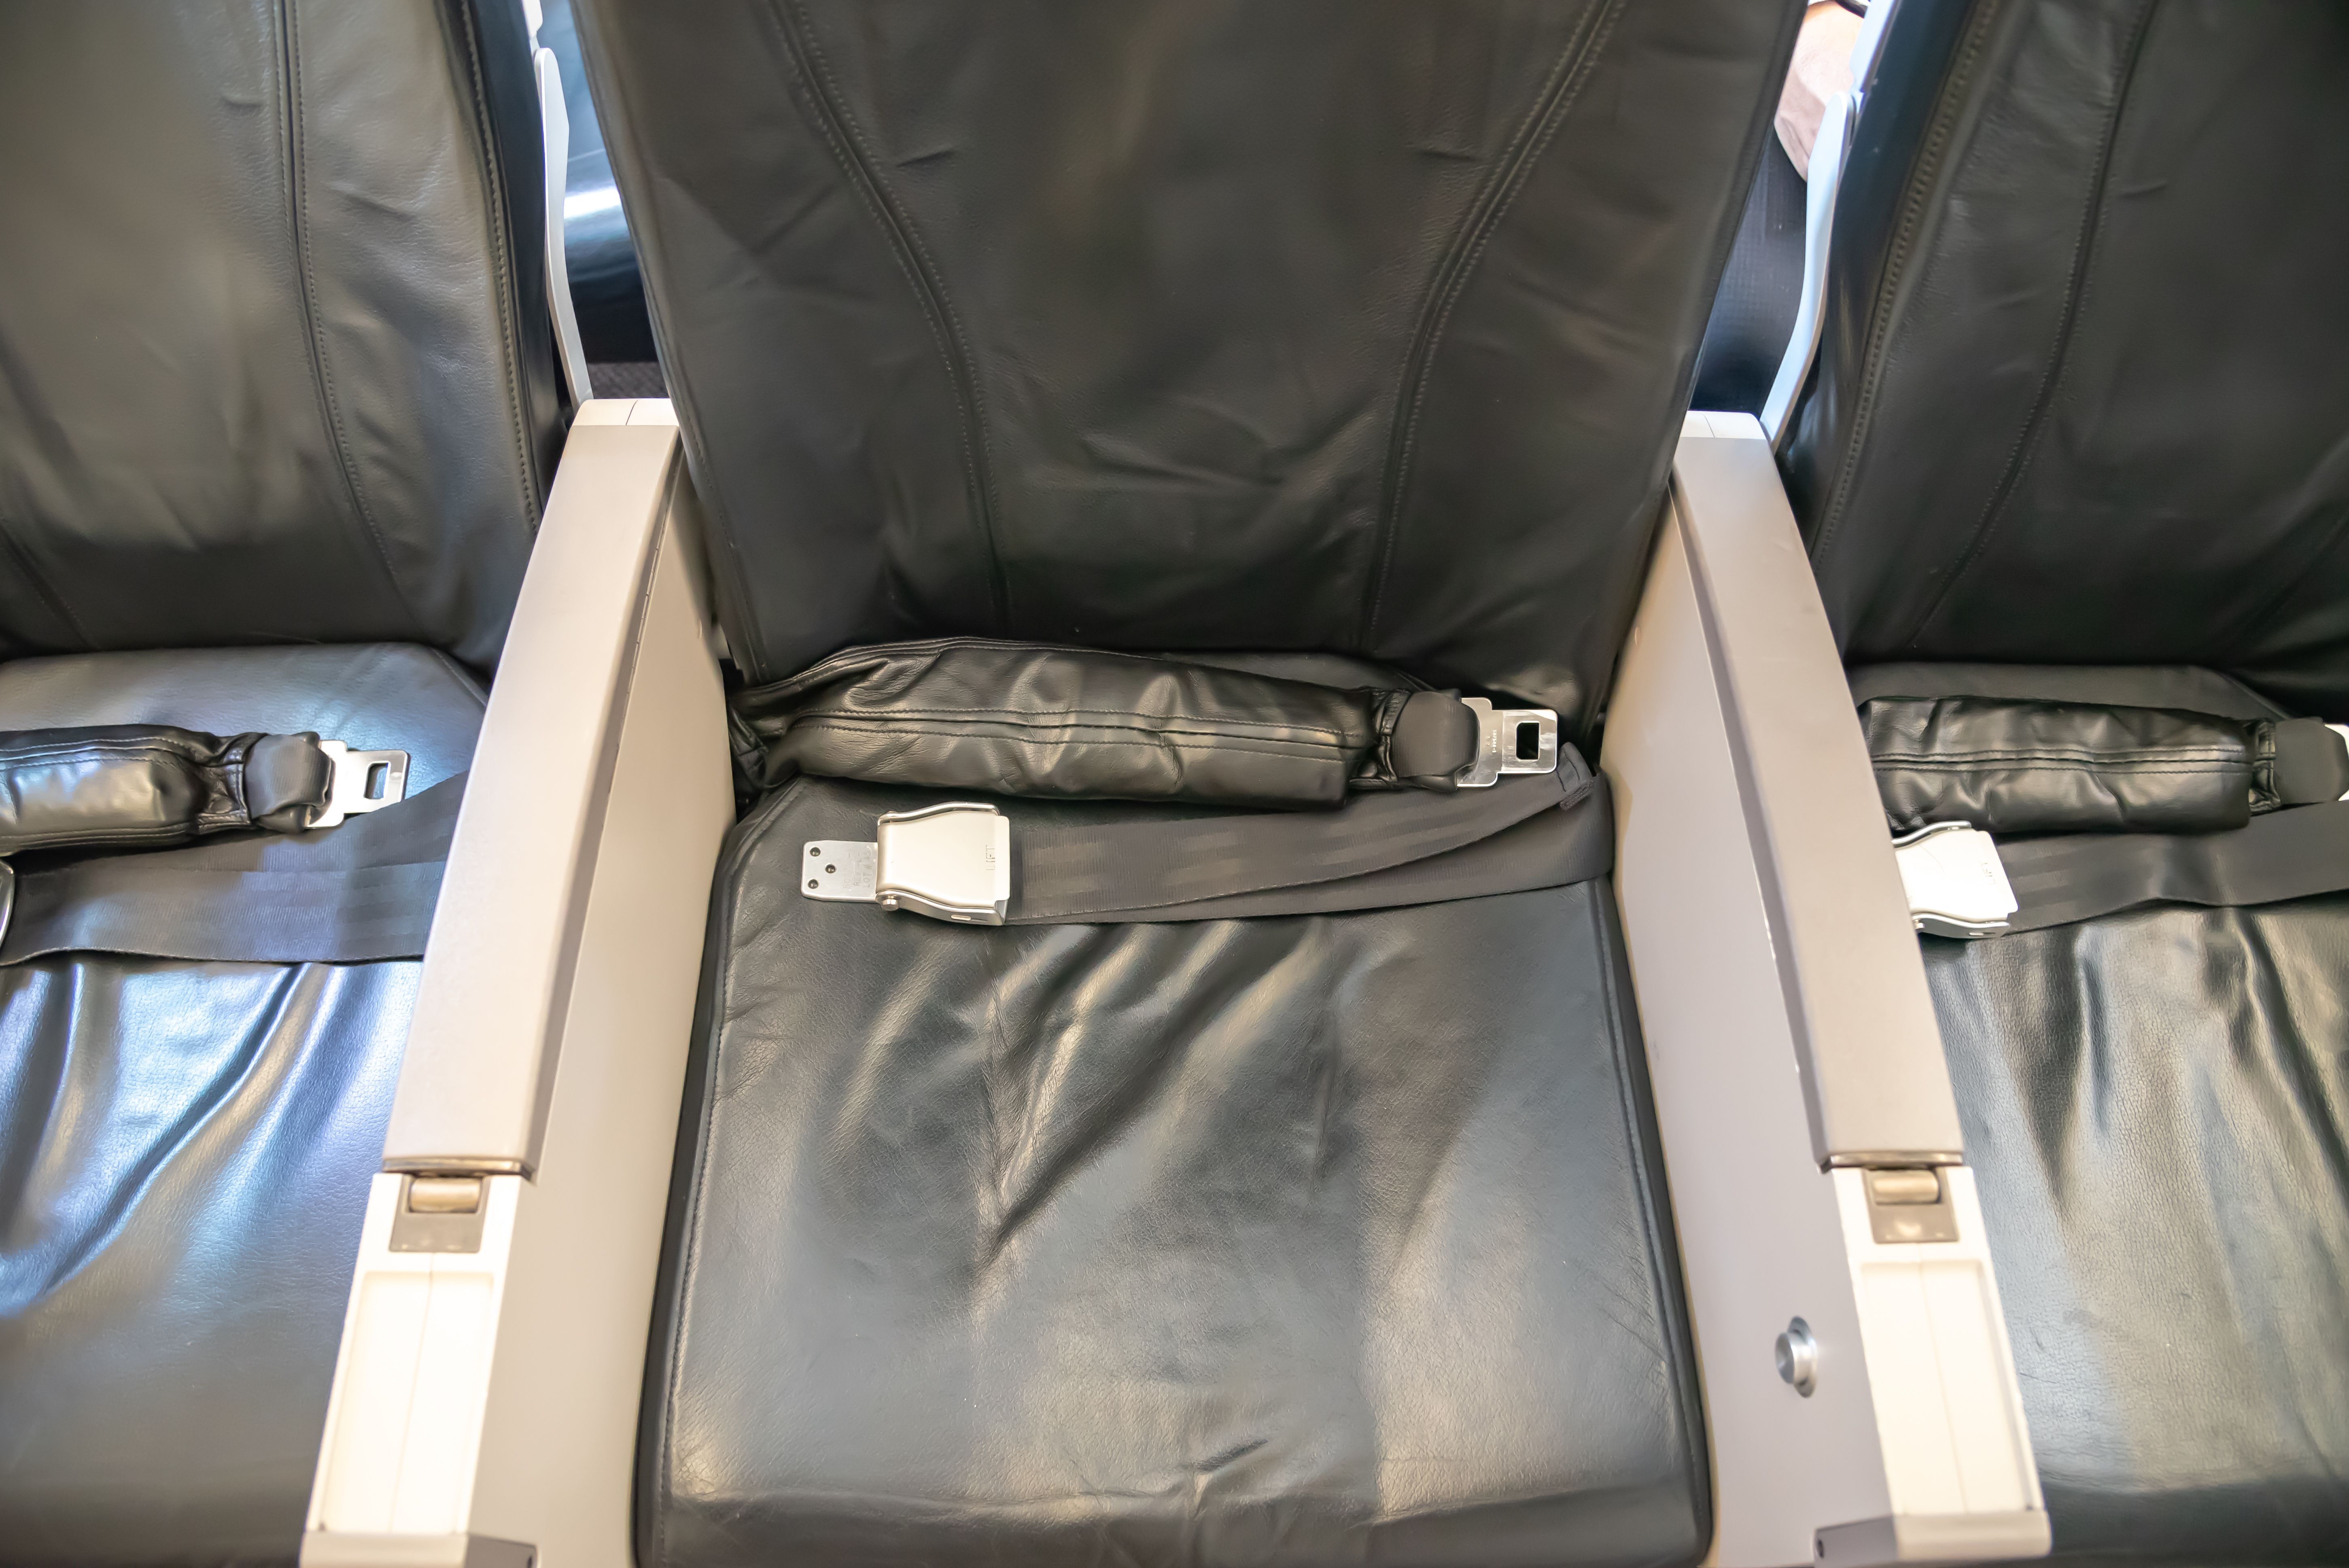 Economy class seat with an airbag installed within the seatbelt